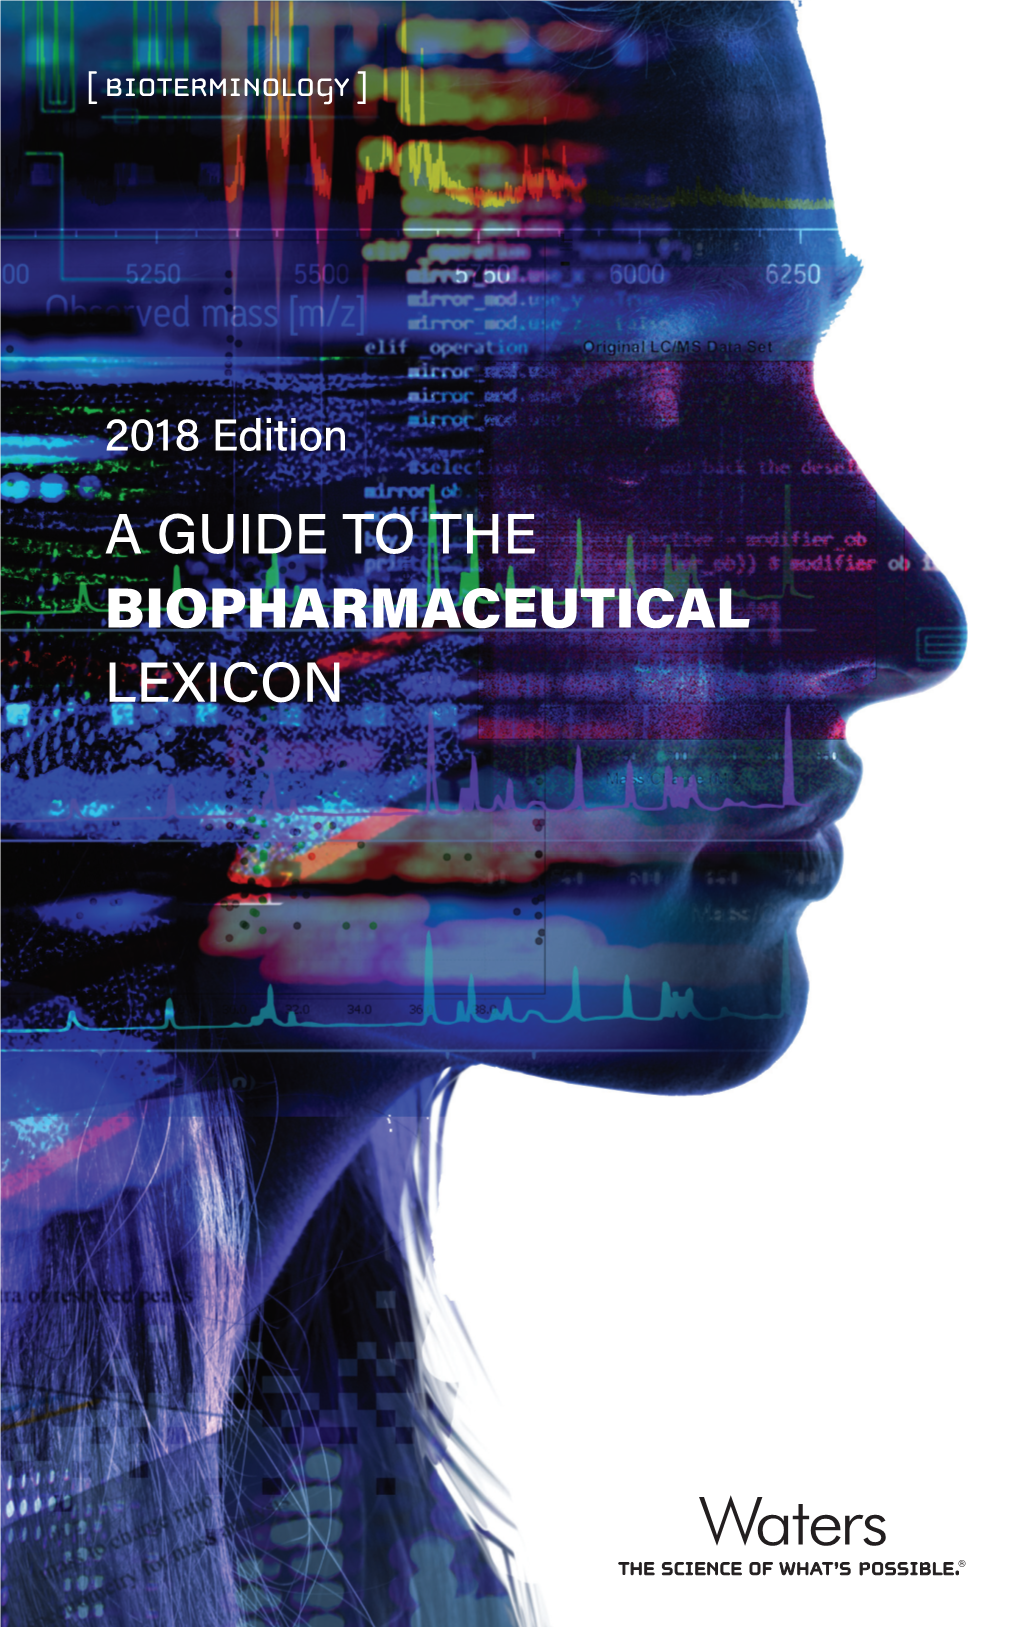 A Guide to the Biopharmaceutical Lexicon